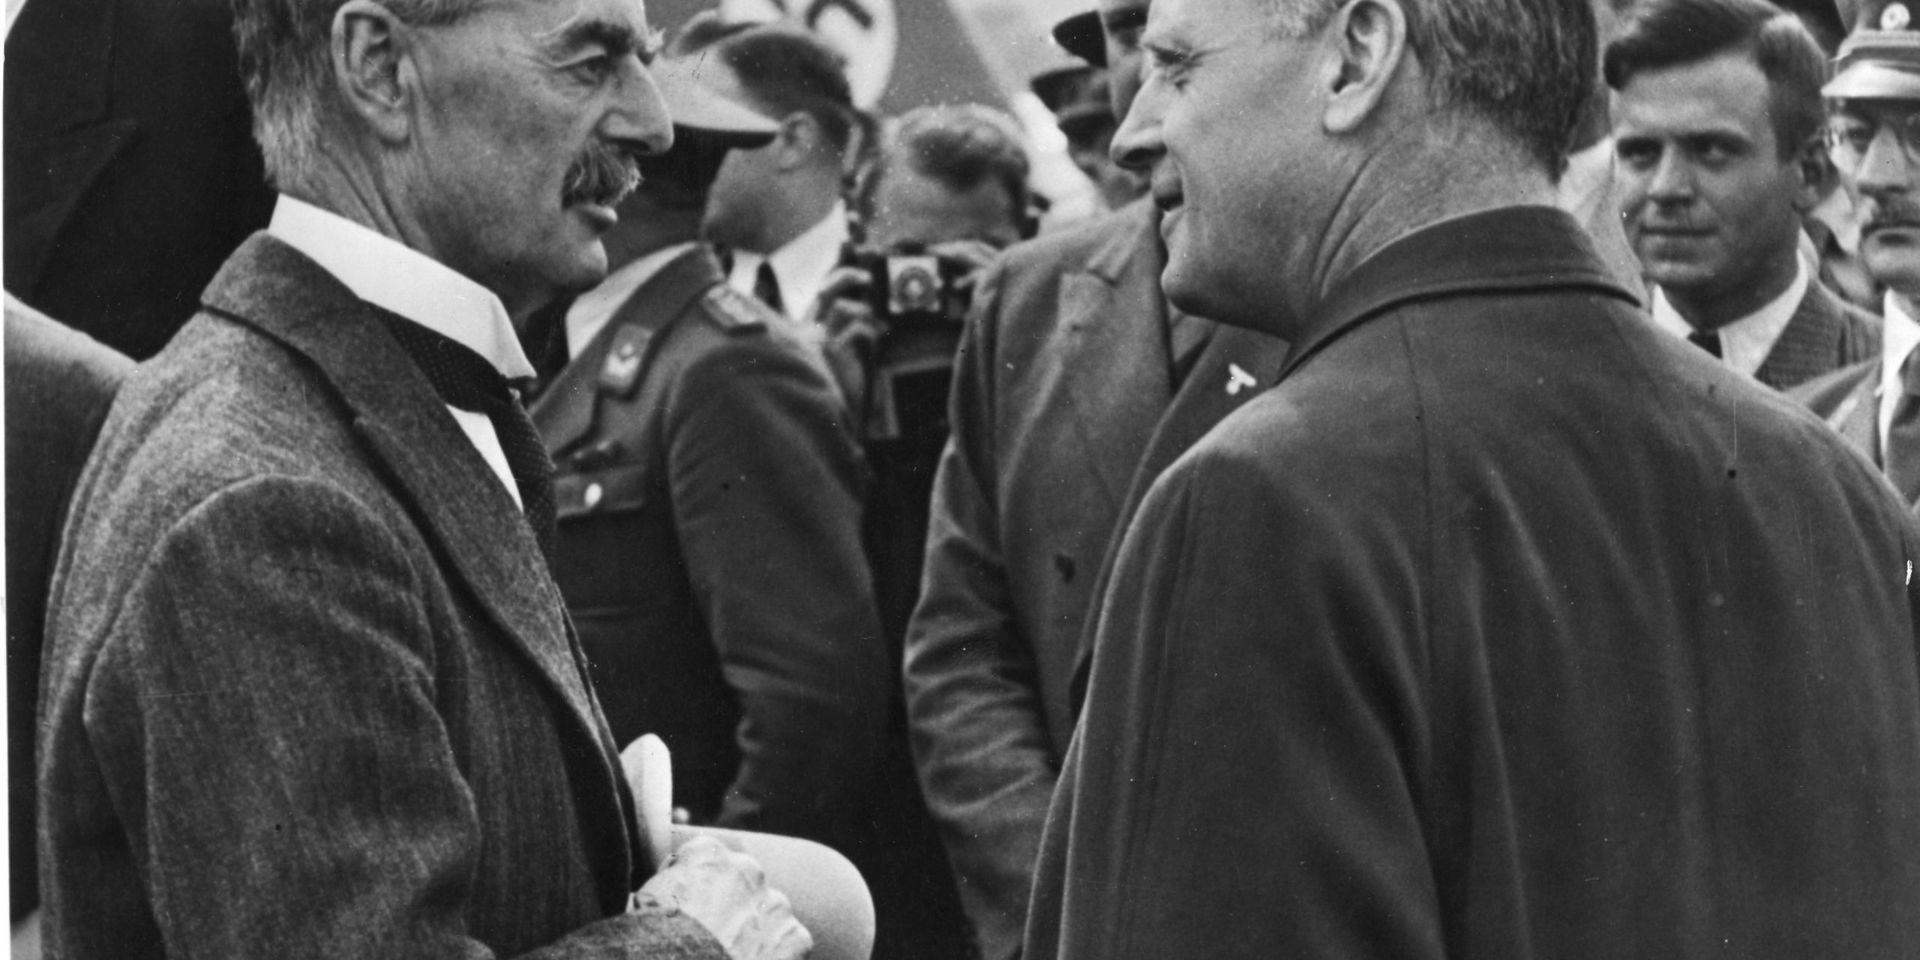 British Premier Sir Neville Chamberlain chats with German foreign minister Joachim von Ribbentrop, shortly after Chamberlain&apos;s arrival in Munich, Germany, September 15, 1938. (AP Photo)